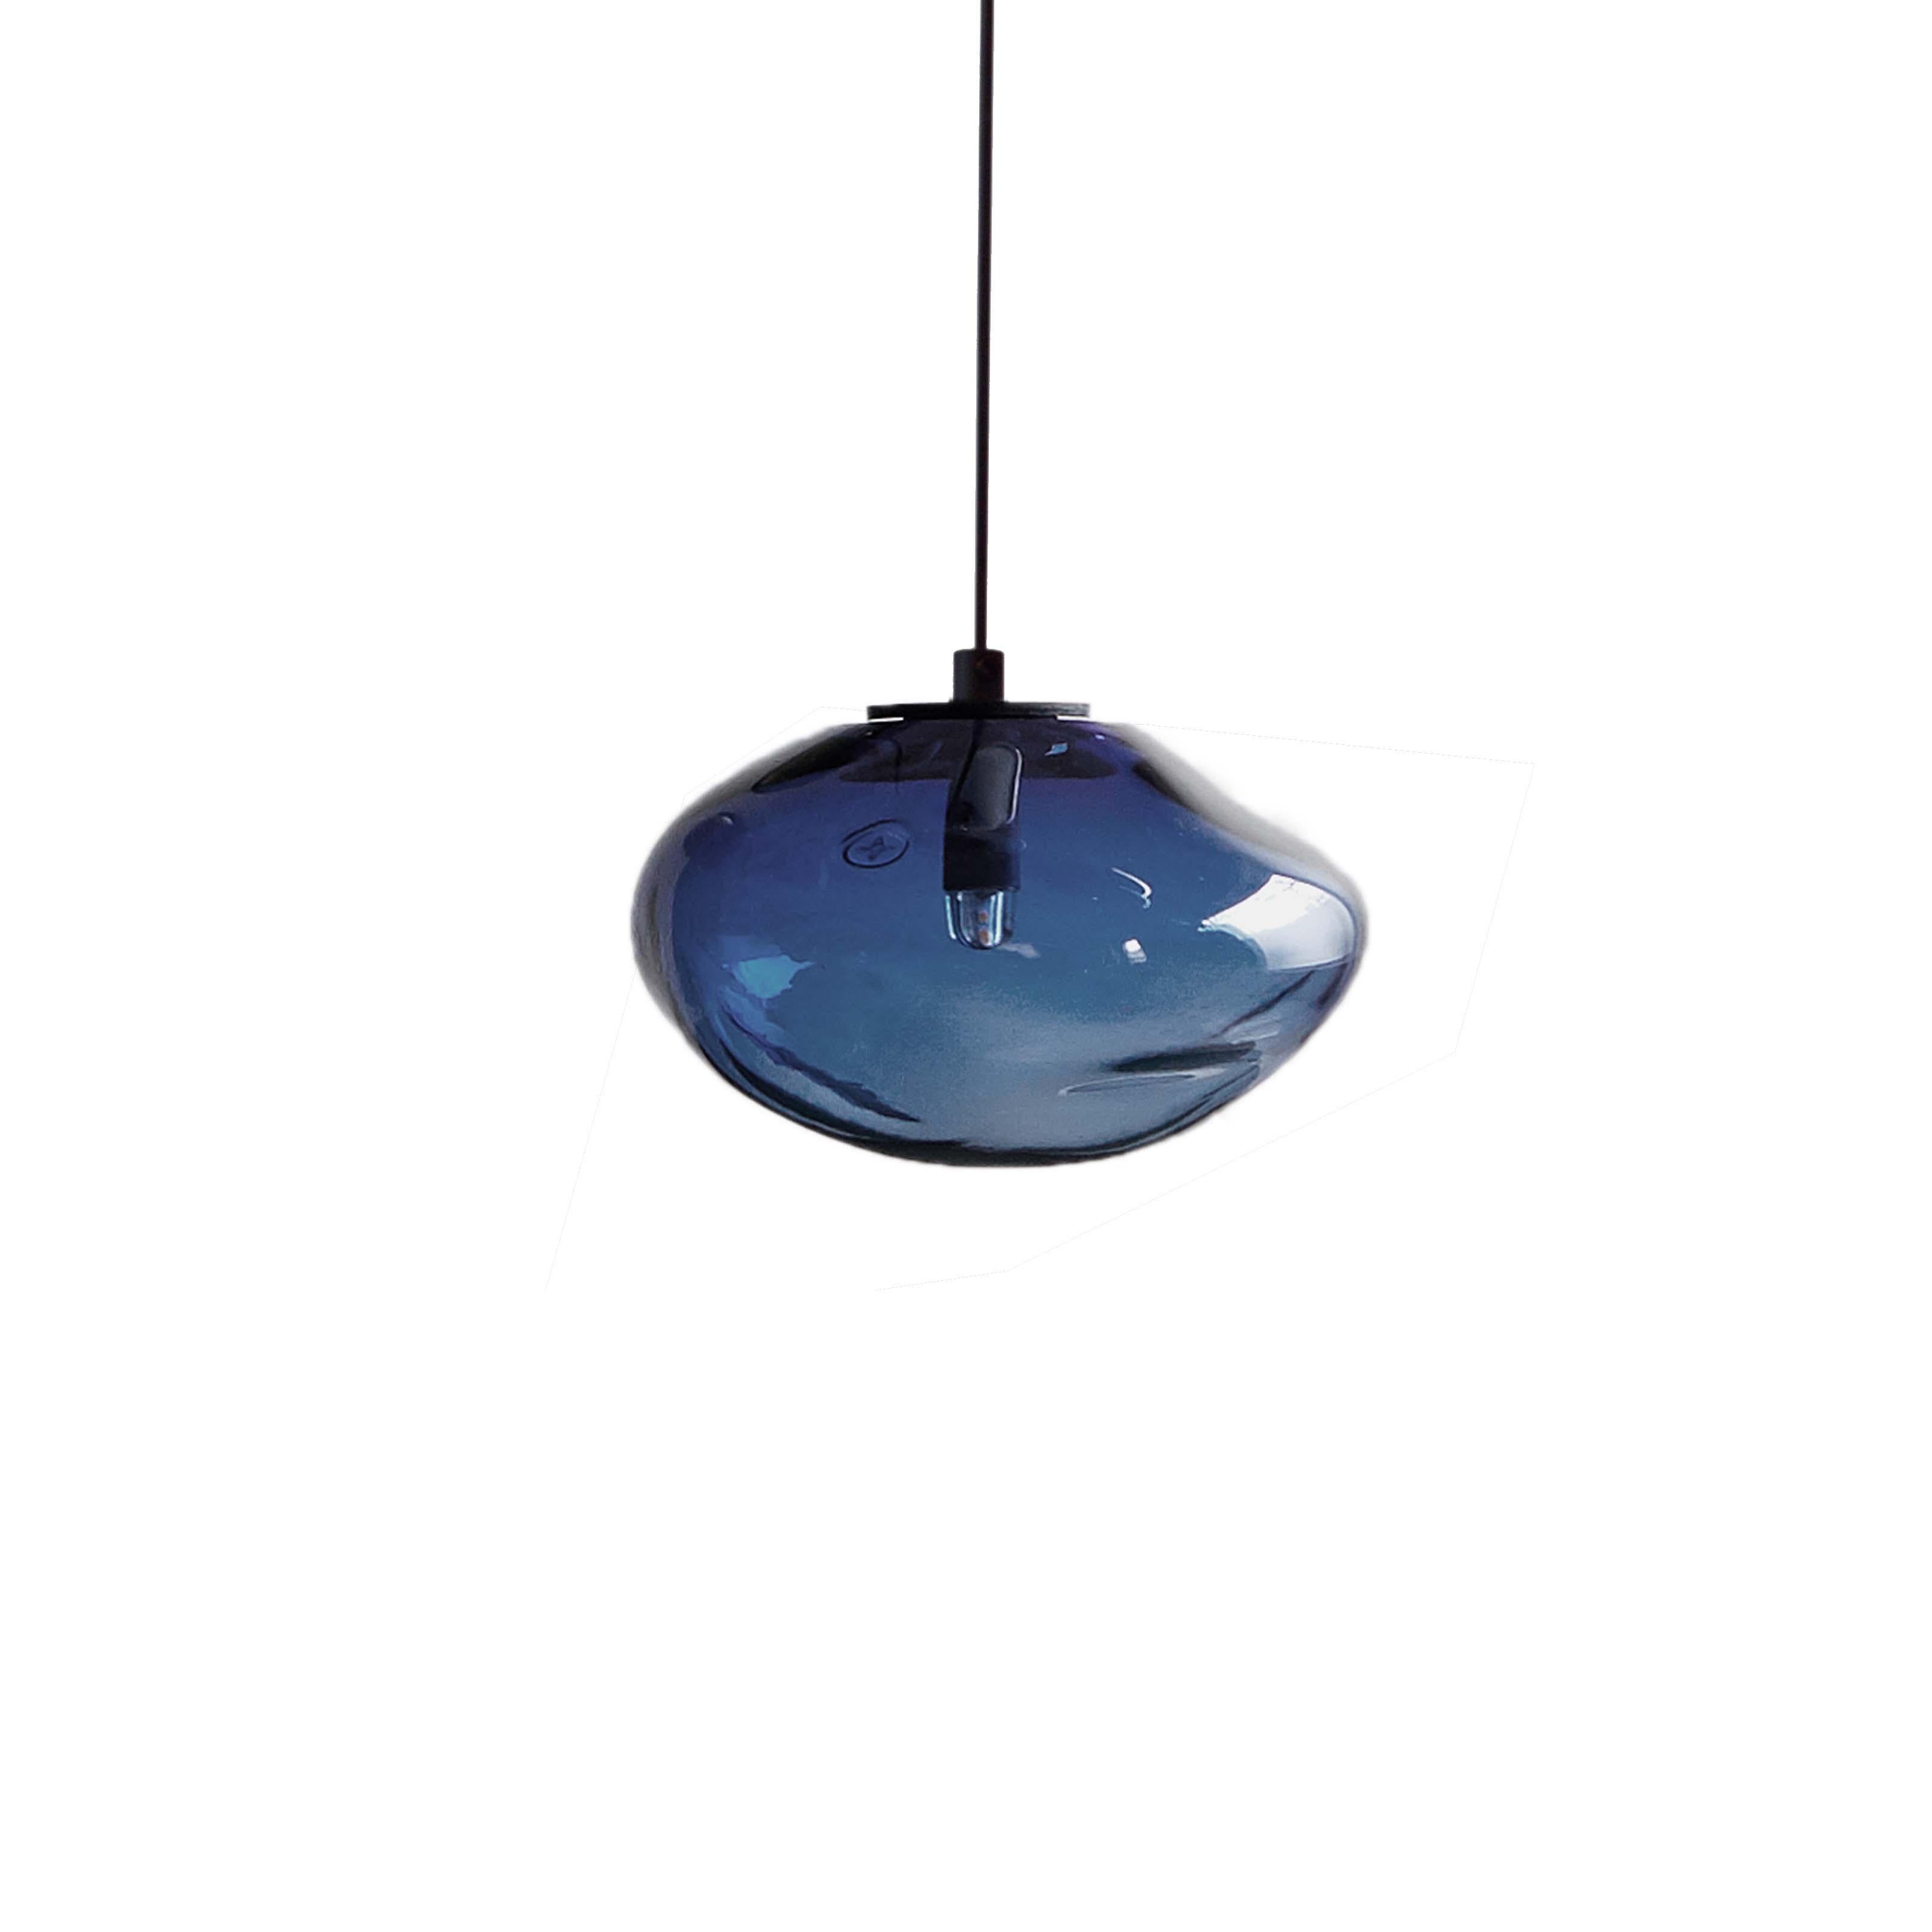 Starglow steel blue pendant by Eloa.
No UL listed 
Material: glass, steel, silver.
Dimensions: D 15 x W 13 x H 100 cm
Also available in different colours and dimensions.

All our lamps can be wired according to each country. If sold to the USA it